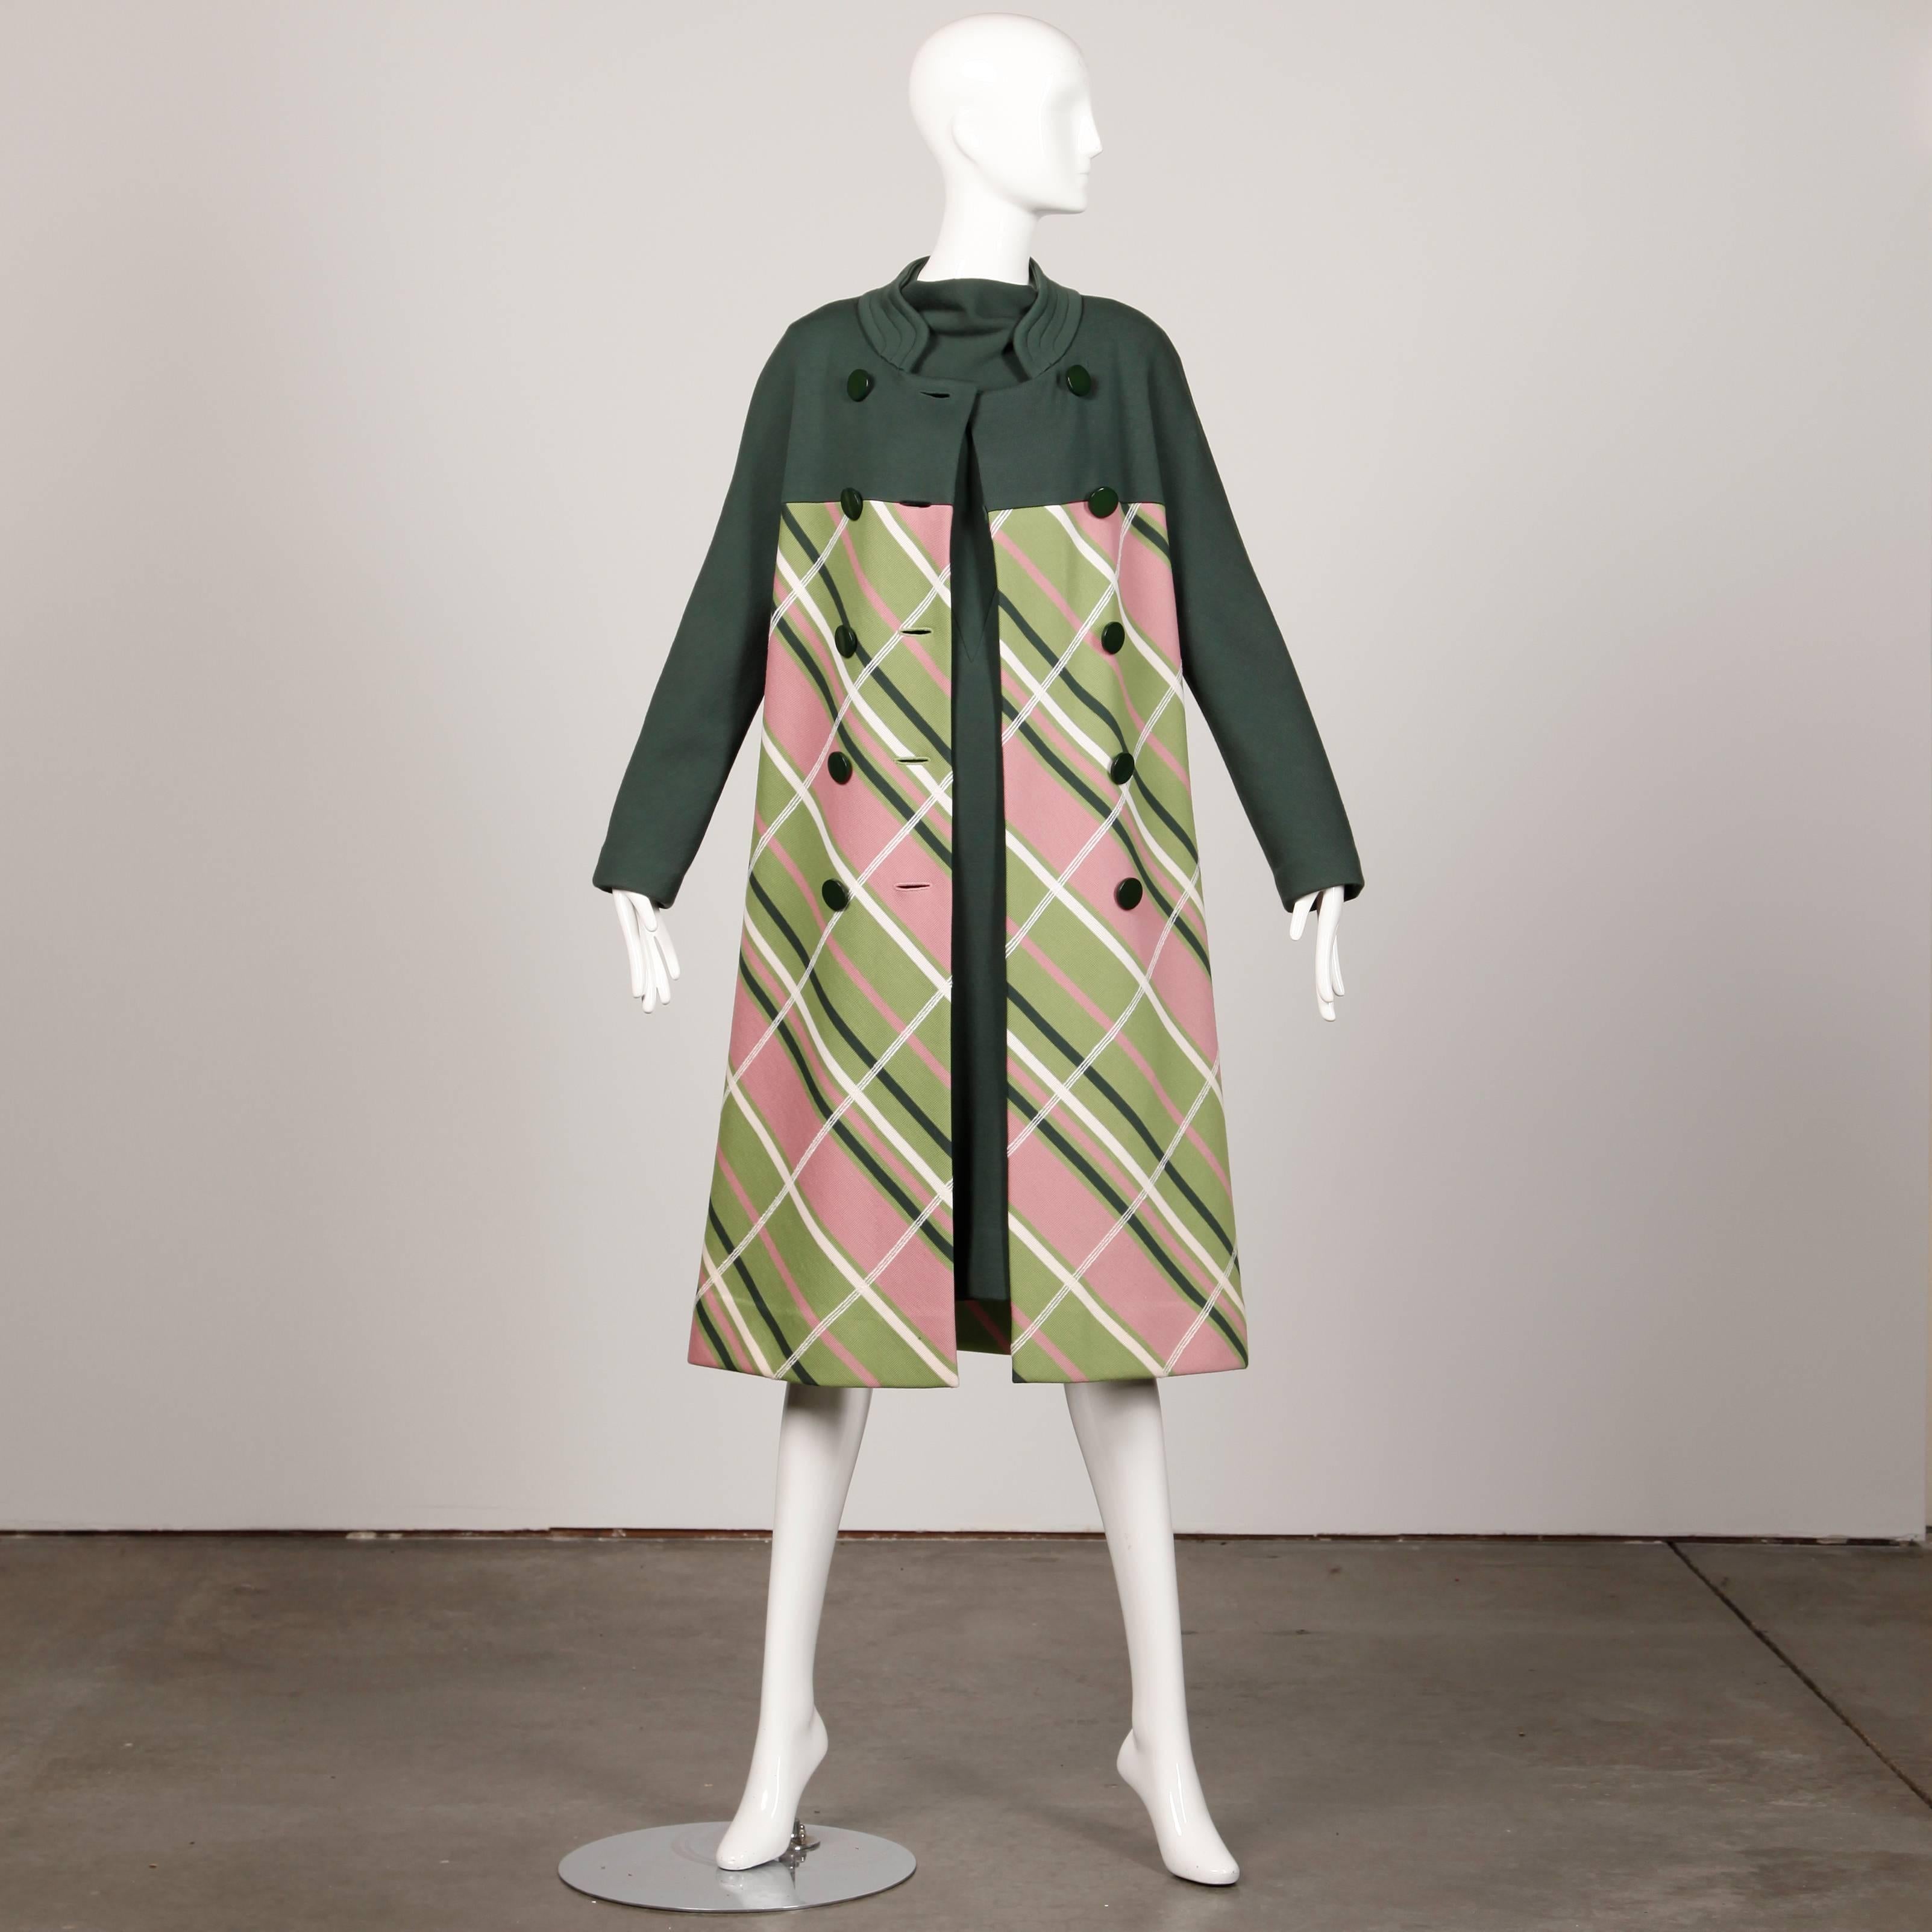 Chic 1960s wool knit coat and dress set in shades of avocado green and pink plaid by Gino Paoli. Both pieces are unlined and made of fine quality 100% wool knit. The dress zips up the back and the coat features double breasted buttons. The marked